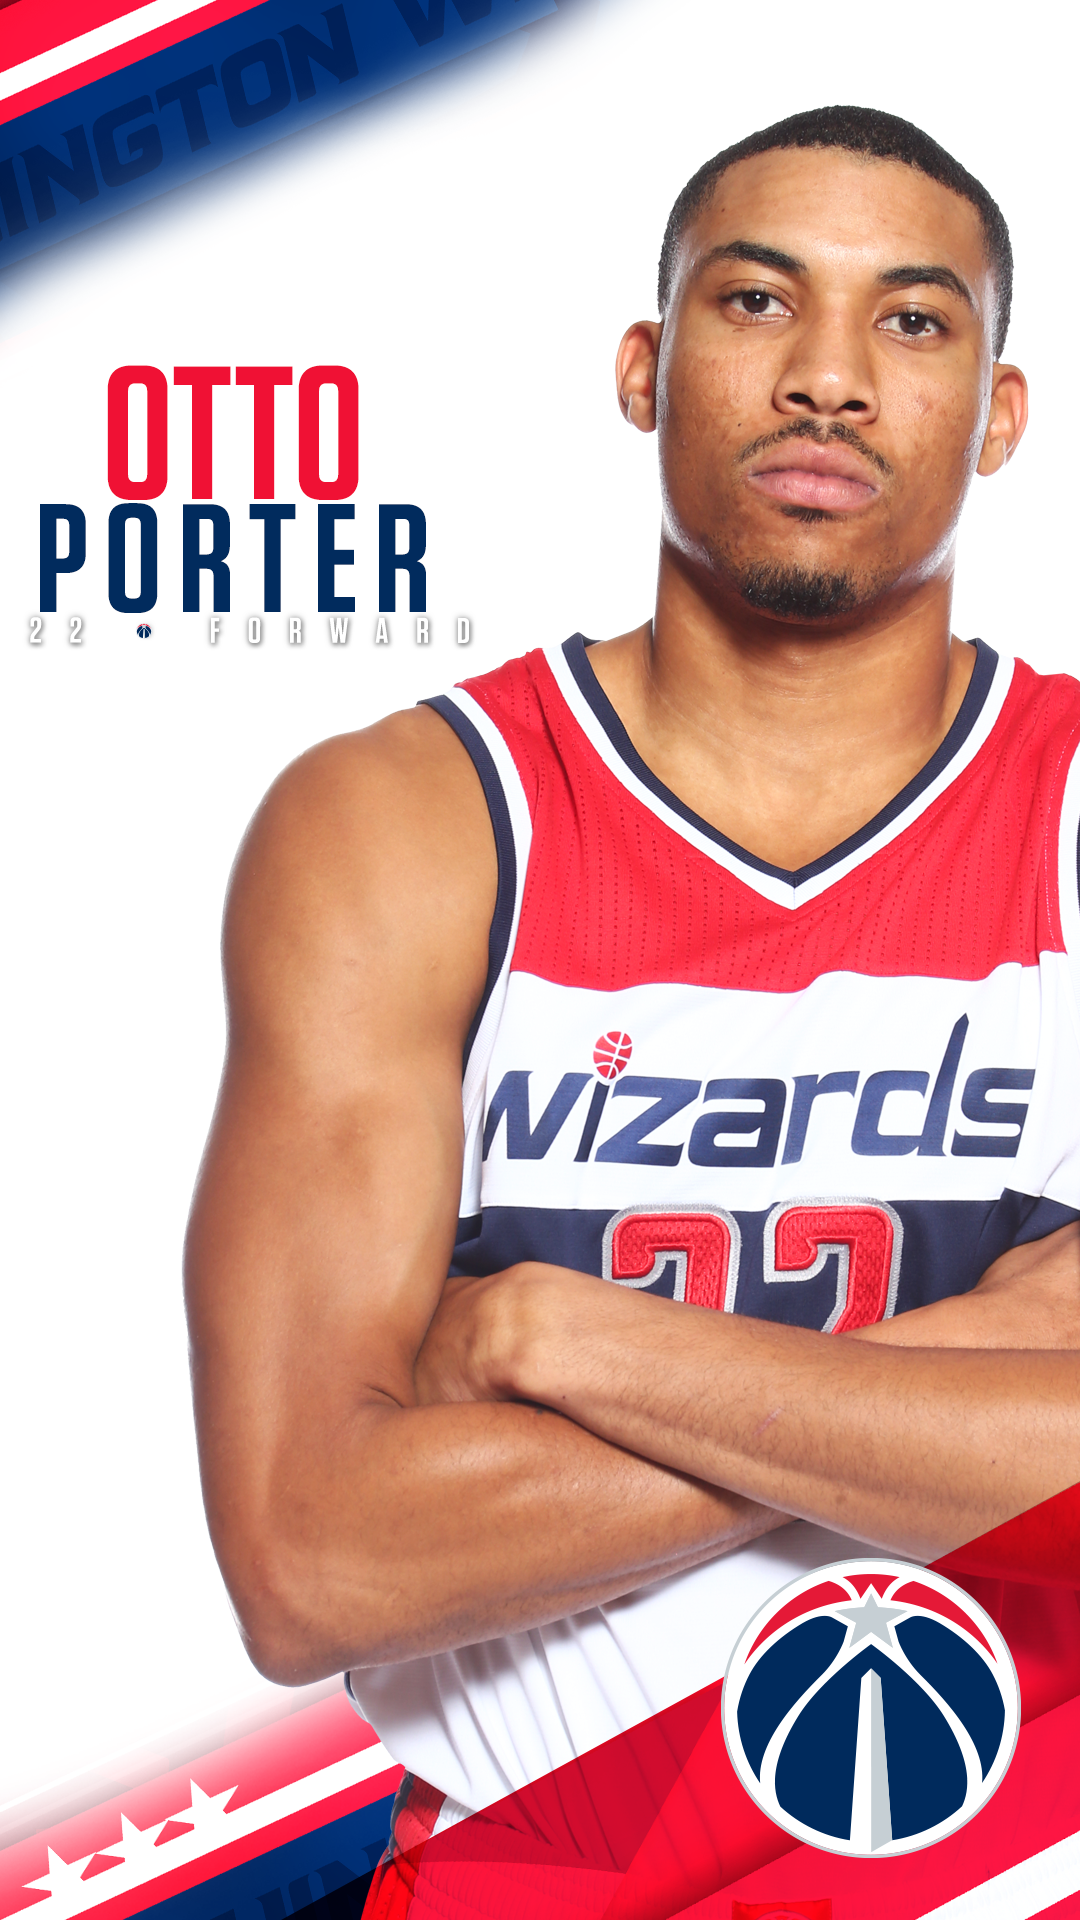 Phone - Otto Porter , HD Wallpaper & Backgrounds